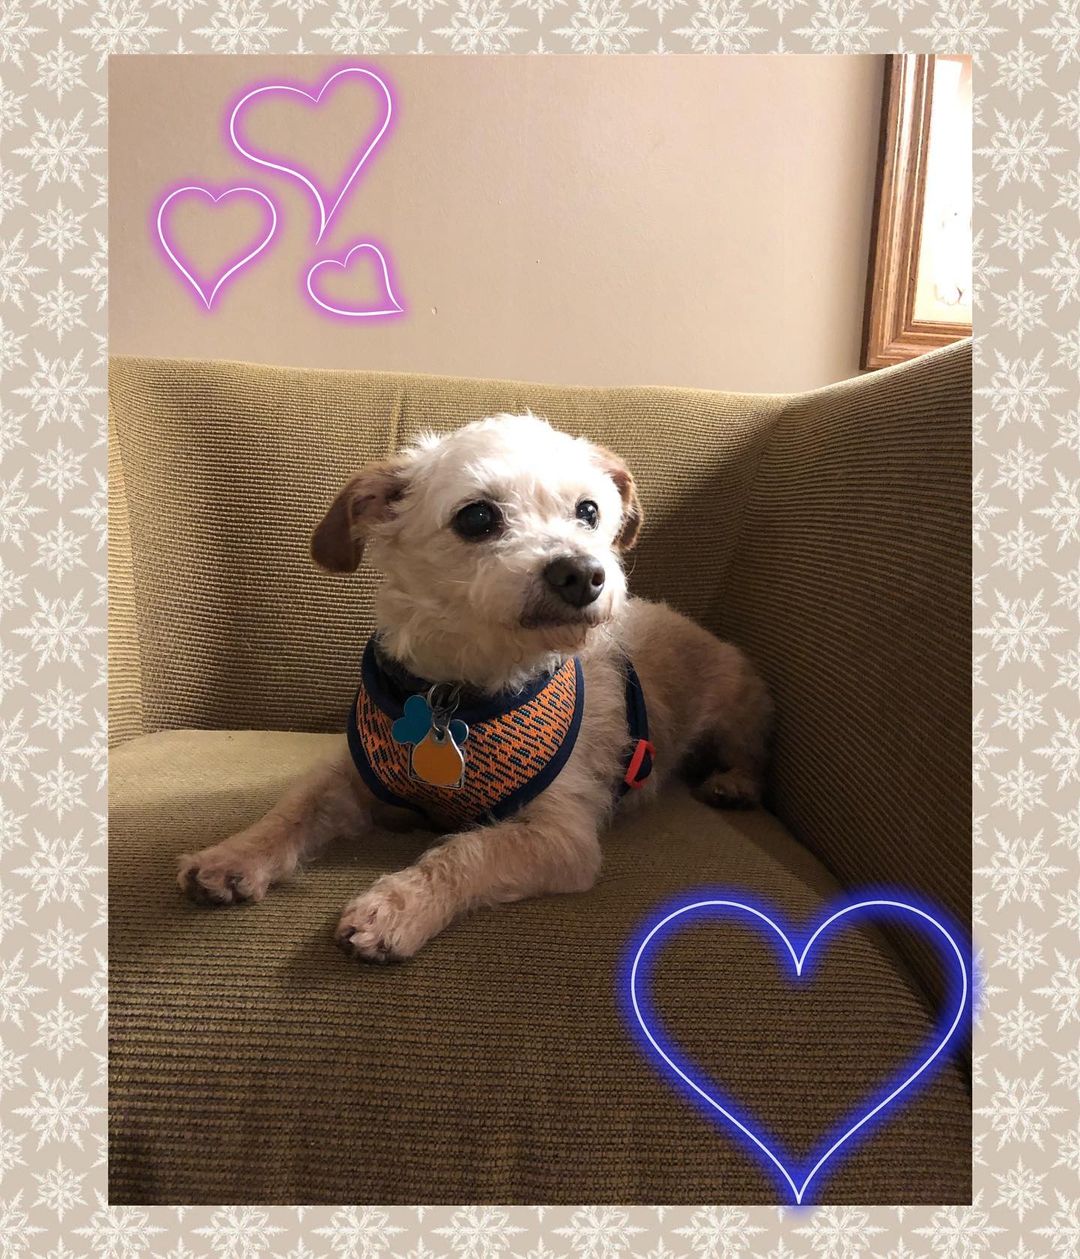 Scruffy - Terrier/Poodle mix, wheaten coloring, male, 9 yrs old, 15 lbs. Sweet and loves to cuddle! 
Please visit our website, Facebook page or call to meet our Buddies and learn more about our adoption process.
—————————————
📞: 847-290-5806
💻: thebuddyfoundation.org
📱: thebuddyfoundation
—————————————
Adoption Hours
•Monday & Wednesday - CLOSED
•Tu/Th/Fri - 10am-12pm | 4pm-8pm
•Saturday - 10am-4pm
•Sunday - 10am-2pm
—————————————
65 W Seegers Rd., Arlington Heights, IL
—————————————
<a target='_blank' href='https://www.instagram.com/explore/tags/adoptdontshop/'>#adoptdontshop</a> <a target='_blank' href='https://www.instagram.com/explore/tags/rescuedog/'>#rescuedog</a>  <a target='_blank' href='https://www.instagram.com/explore/tags/thebuddyfoundation/'>#thebuddyfoundation</a> <a target='_blank' href='https://www.instagram.com/explore/tags/dogsofchicago/'>#dogsofchicago</a> <a target='_blank' href='https://www.instagram.com/explore/tags/chicagodog/'>#chicagodog</a> <a target='_blank' href='https://www.instagram.com/explore/tags/chicagorescue/'>#chicagorescue</a> <a target='_blank' href='https://www.instagram.com/explore/tags/dogsofinstagram/'>#dogsofinstagram</a> <a target='_blank' href='https://www.instagram.com/explore/tags/lovedogs/'>#lovedogs</a> <a target='_blank' href='https://www.instagram.com/explore/tags/shelterdog/'>#shelterdog</a>